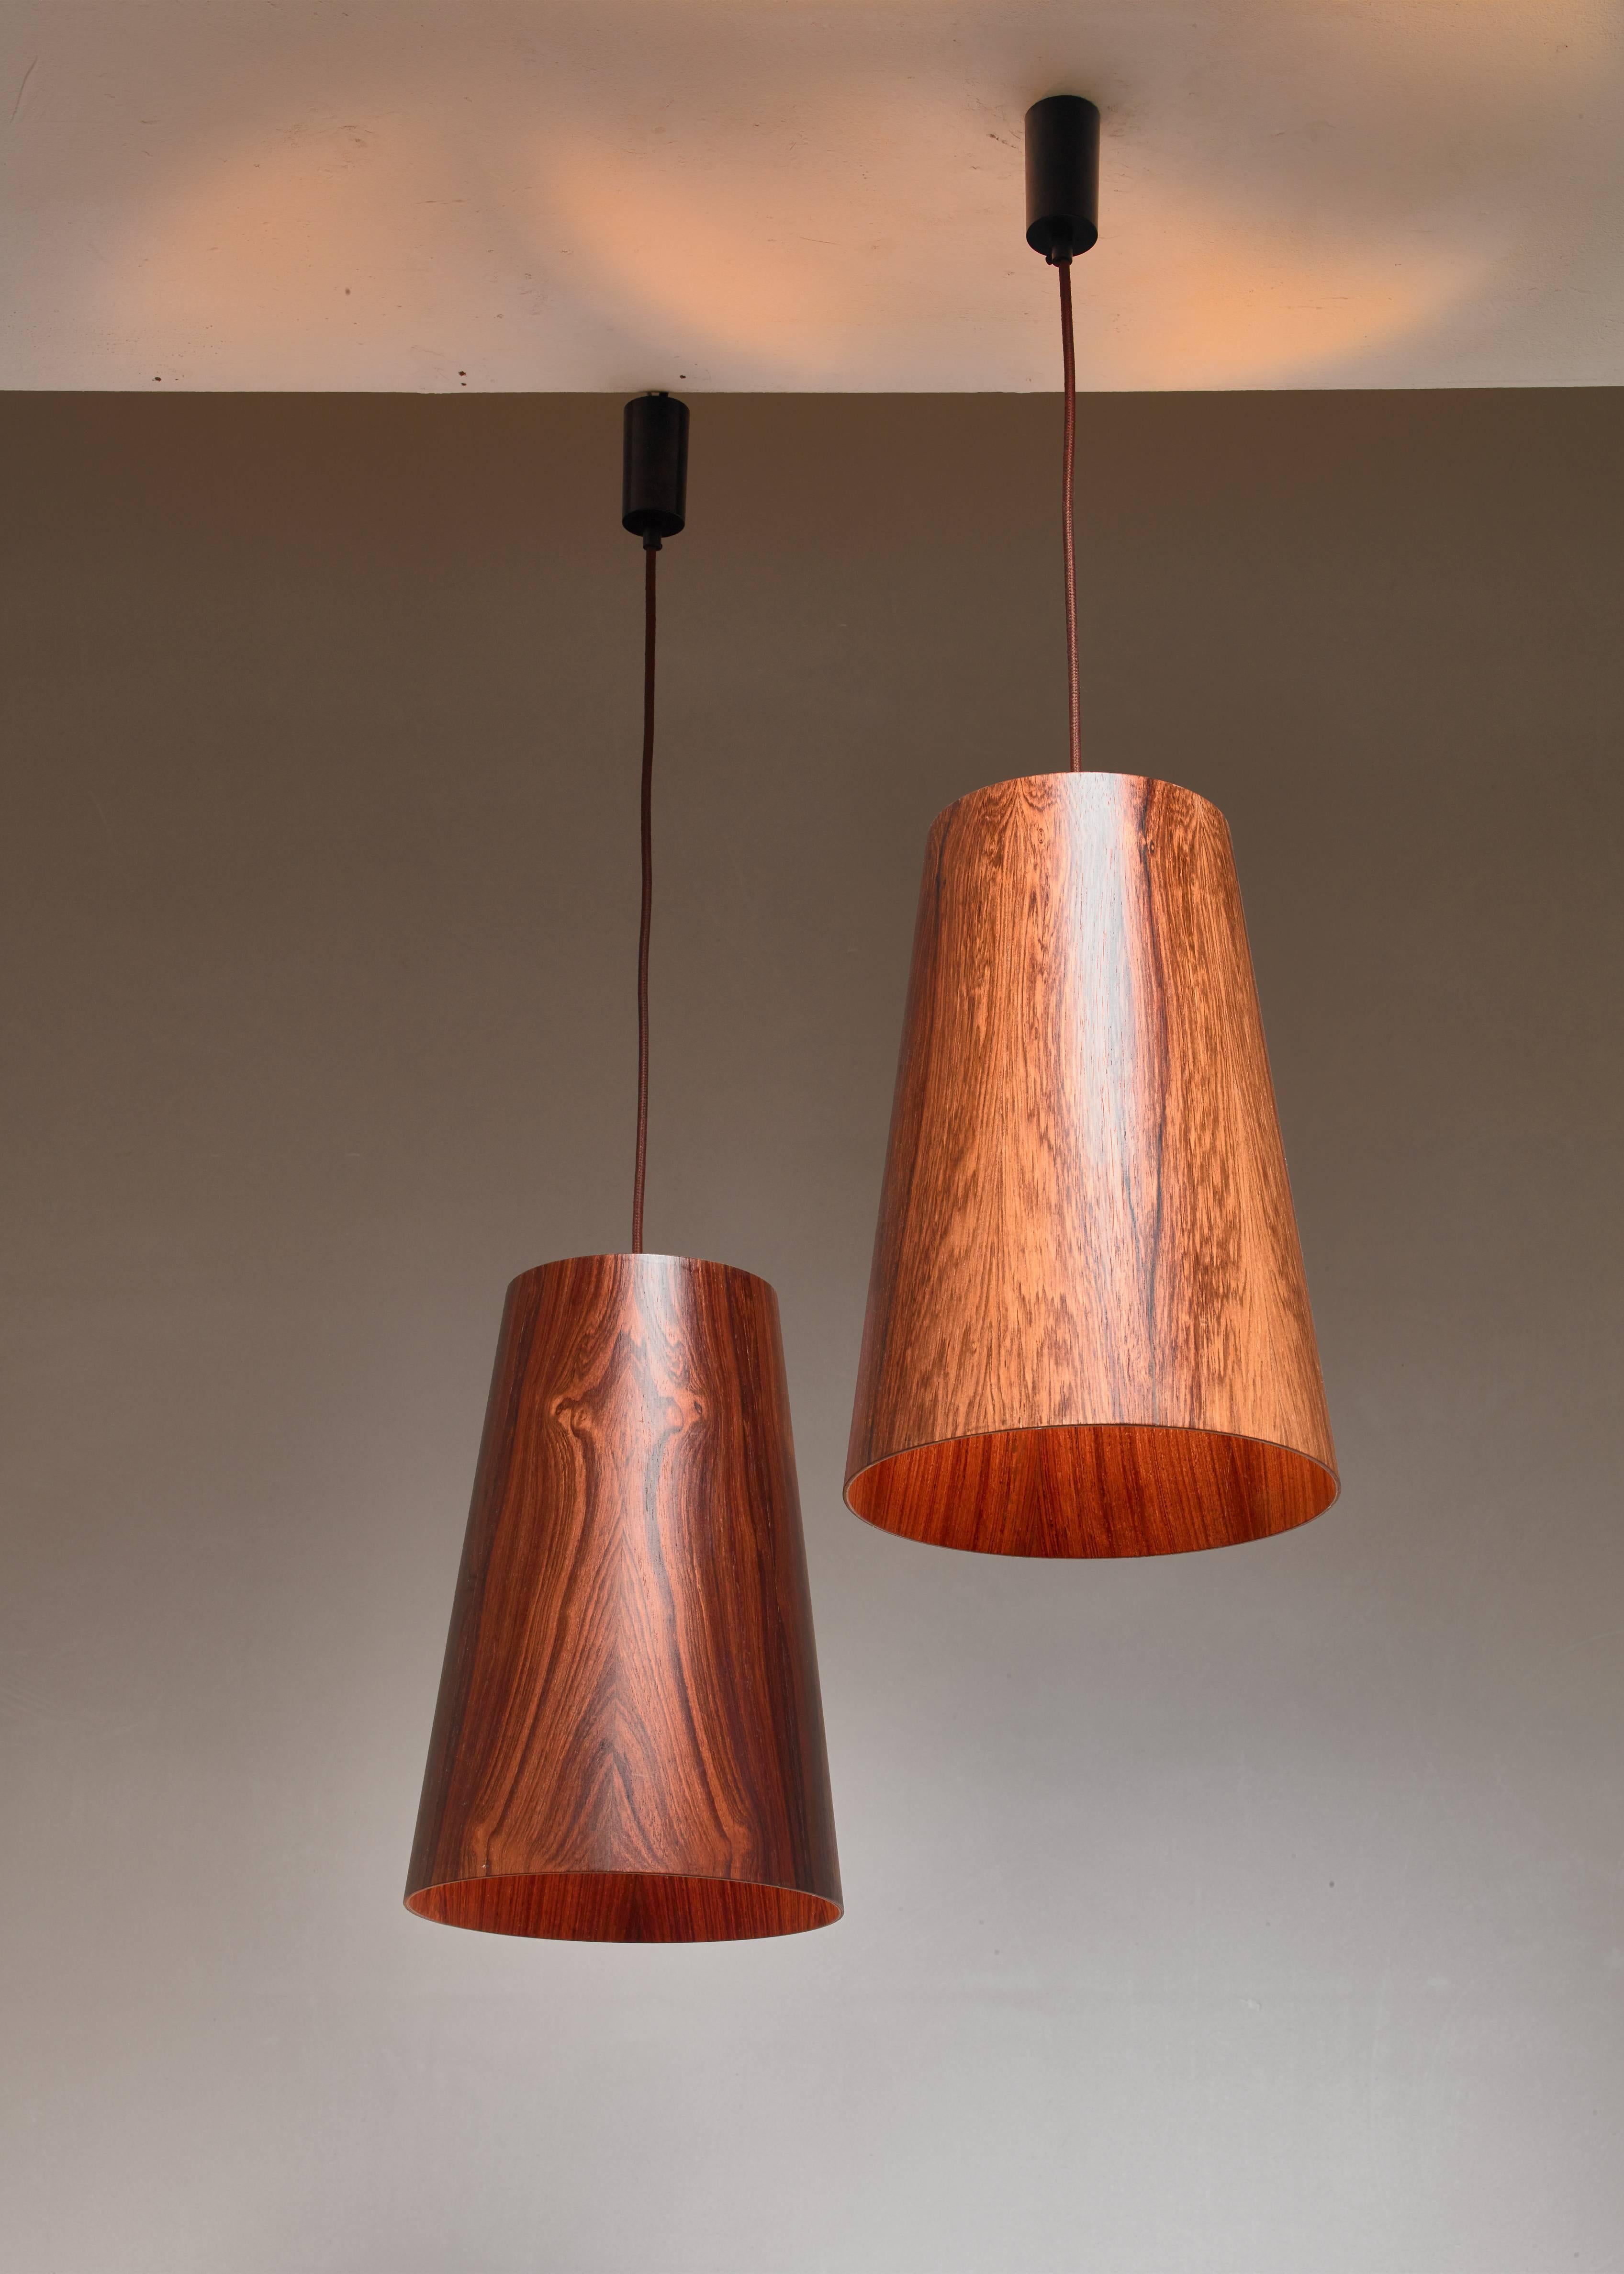 A pair of 1960s wooden pendant lamps, attributed to Östen & Uno Kristiansson for Luxus, Vittsjö, Sweden. The lamps are made of large (40.5 cm/16